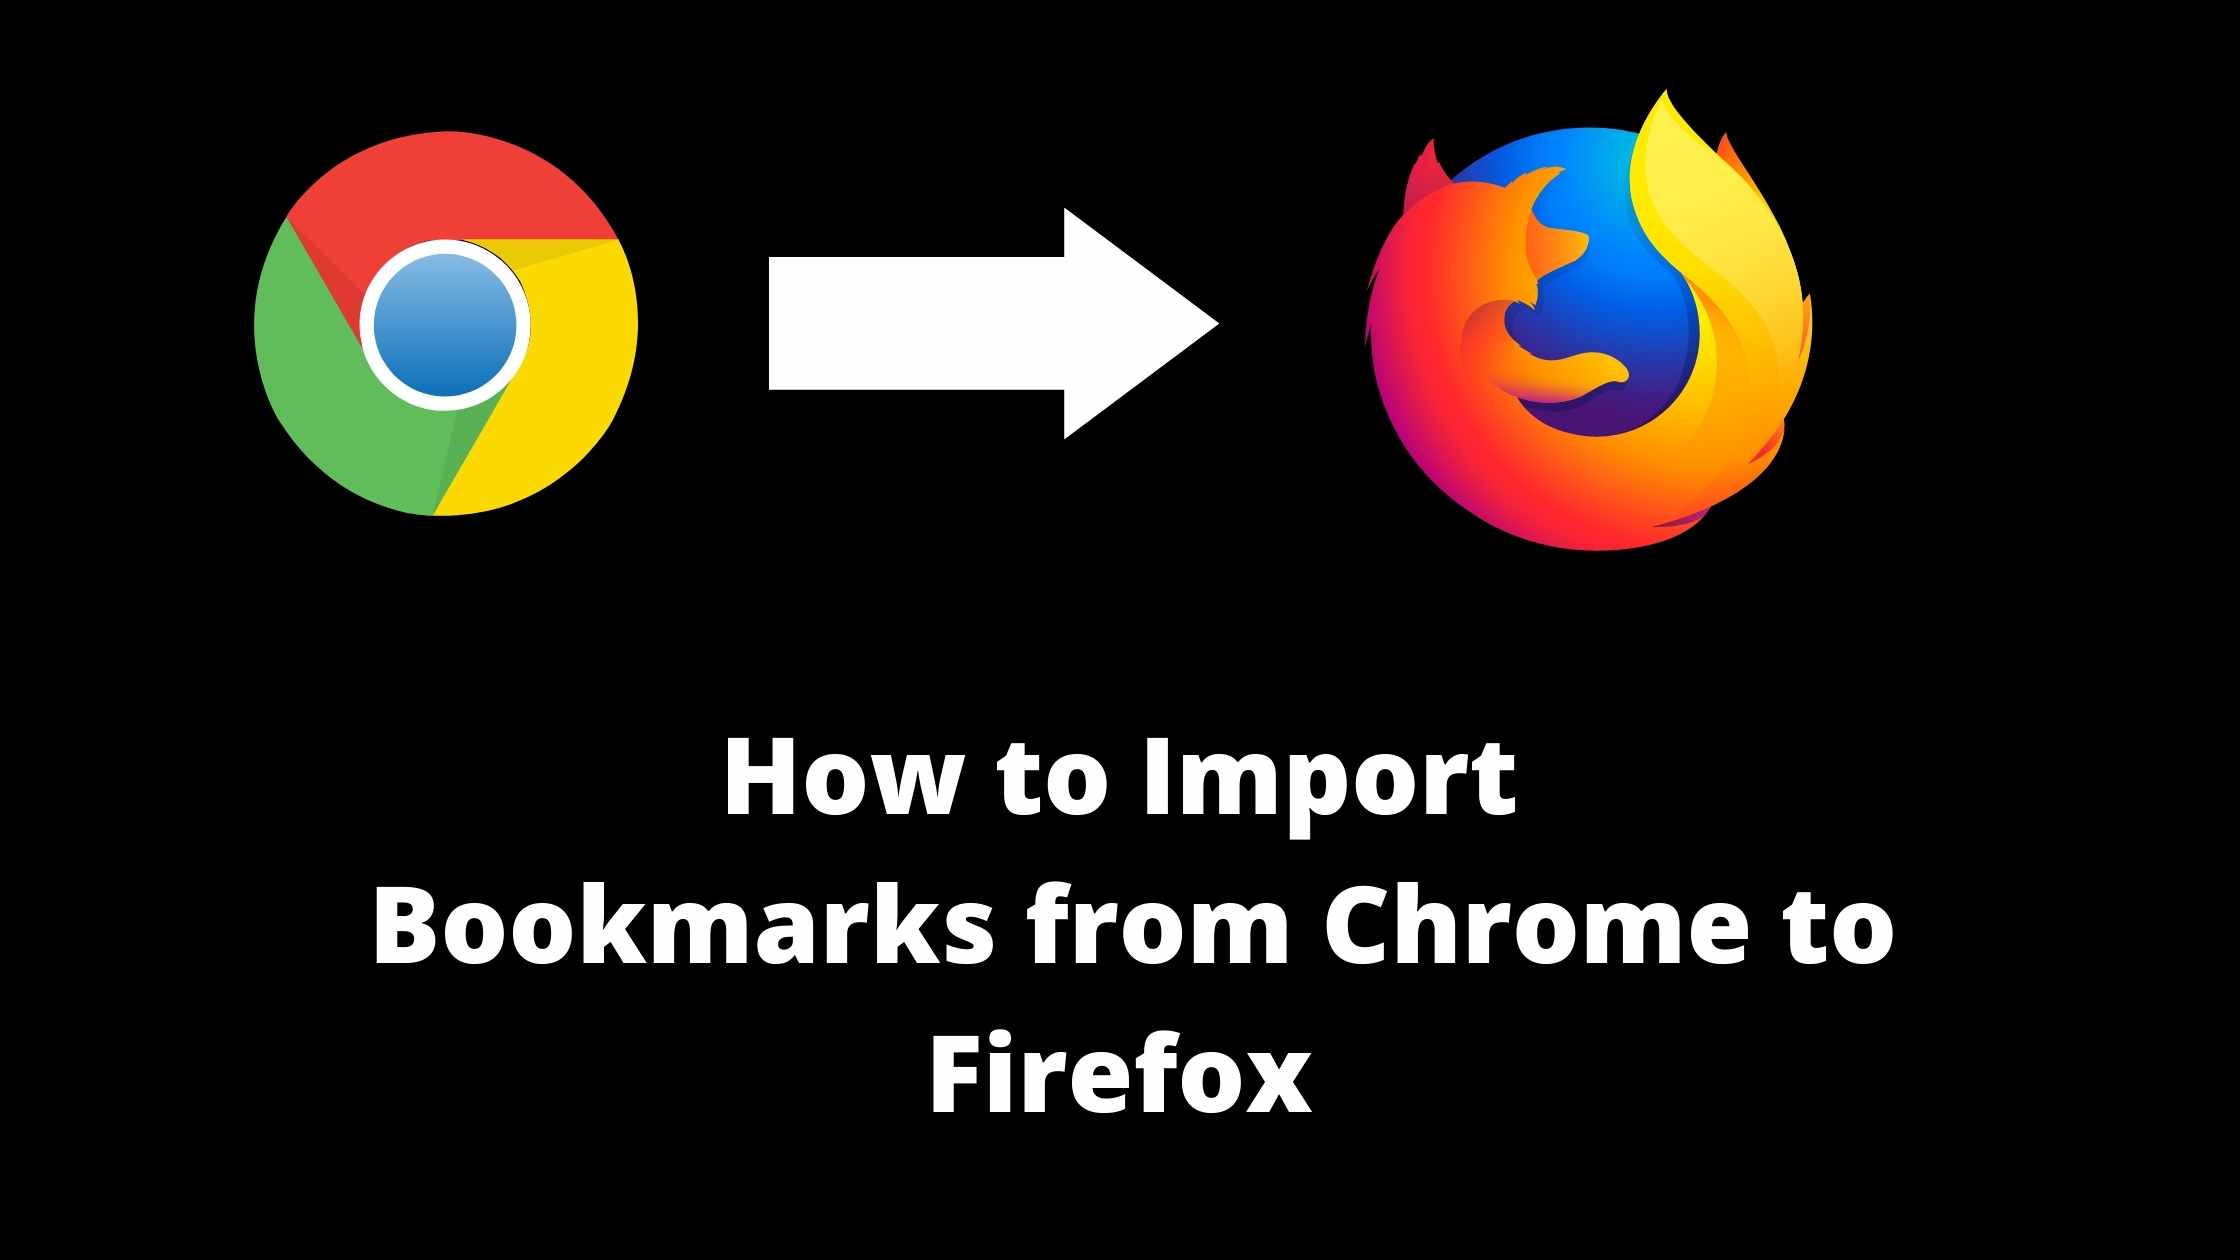 how to import bookmarks from chrome to Firefox